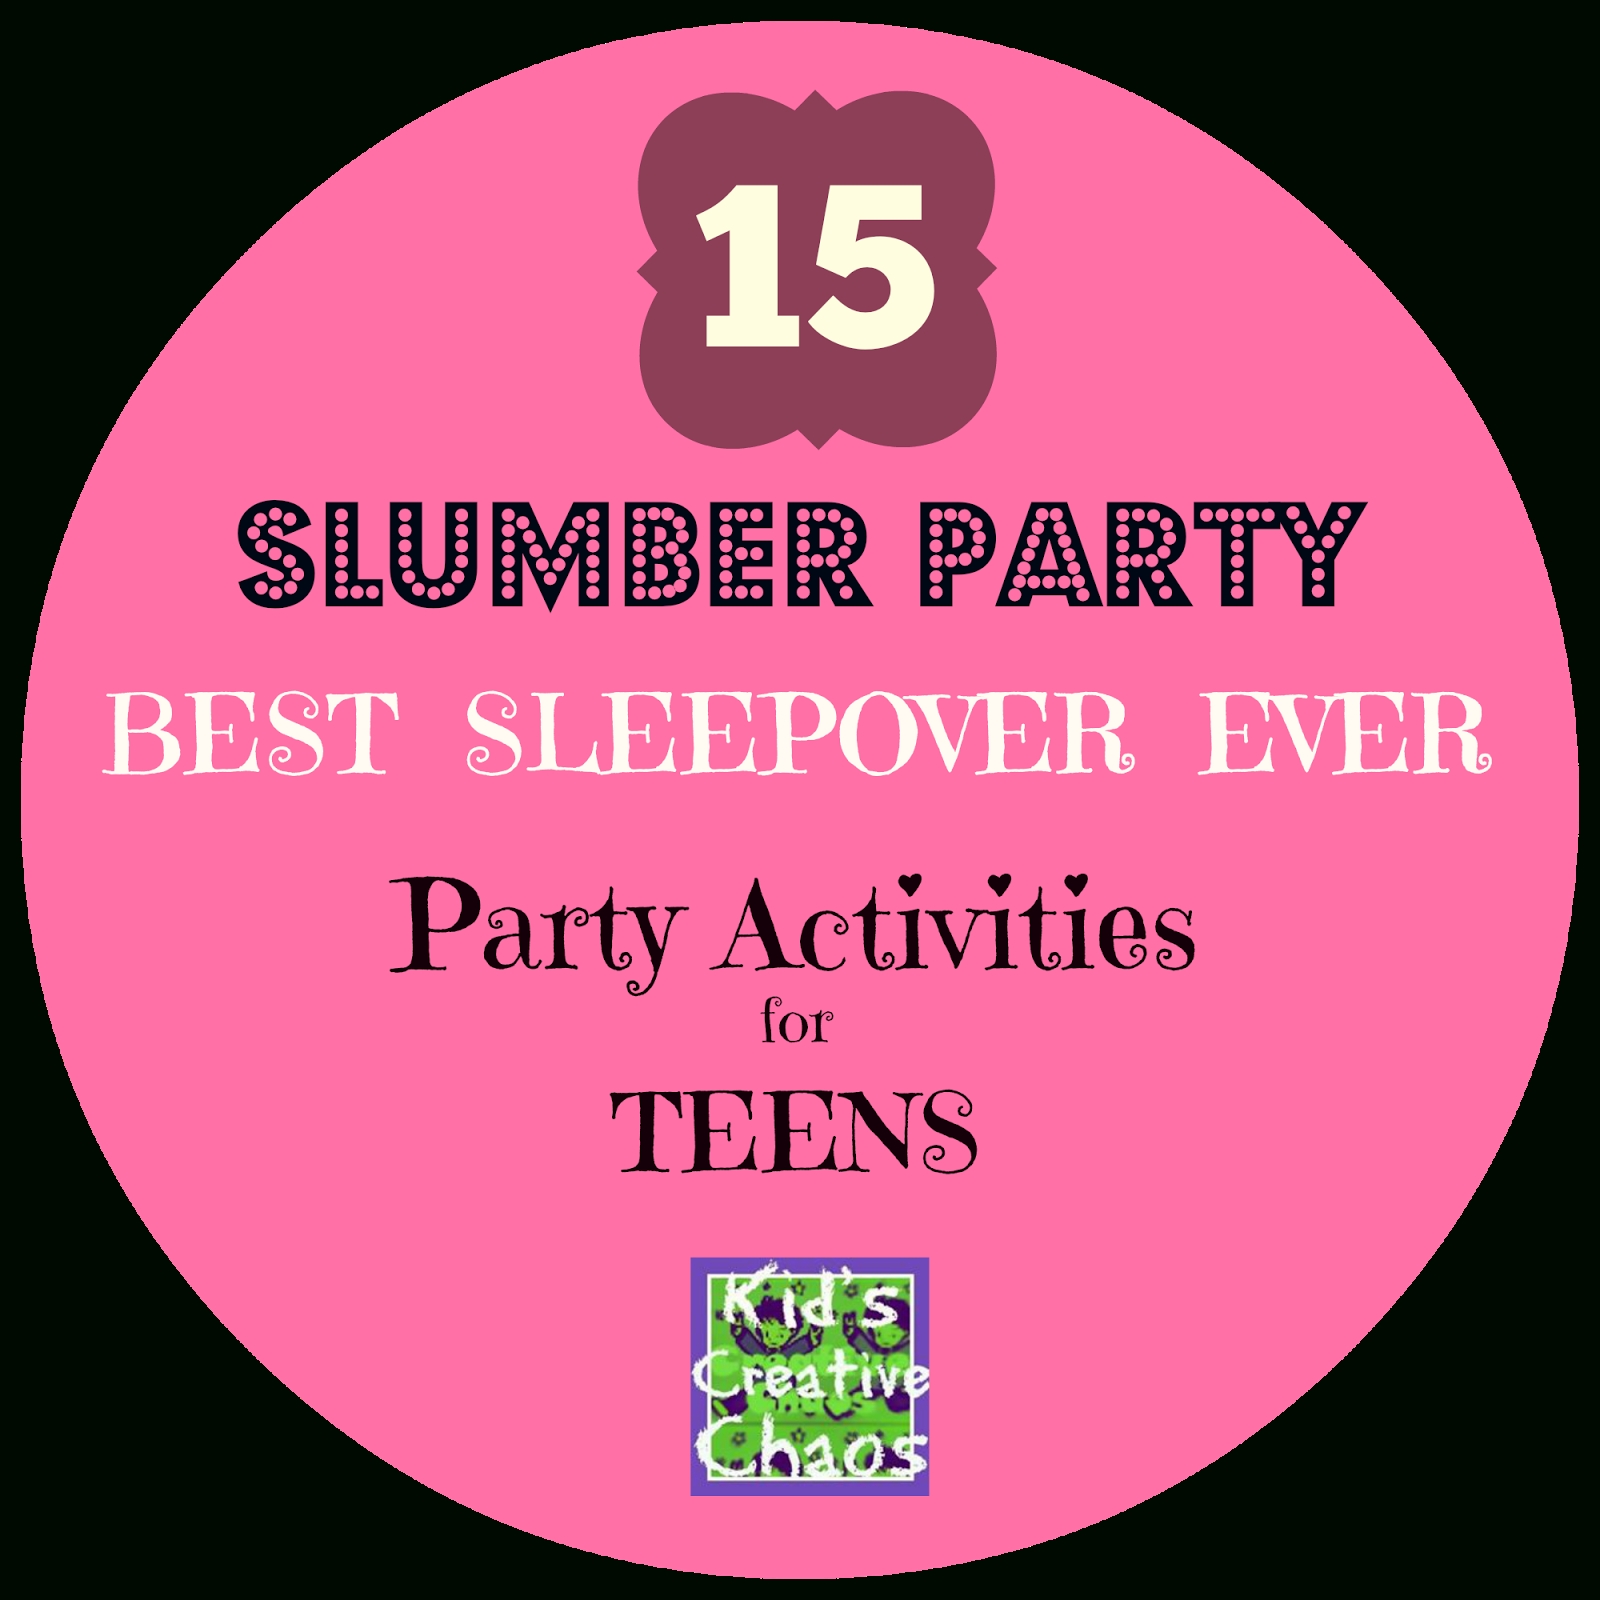 10 Awesome Fun Sleepover Ideas For Teenagers 15 slumber party games and activities for teen girls best sleepover 2022